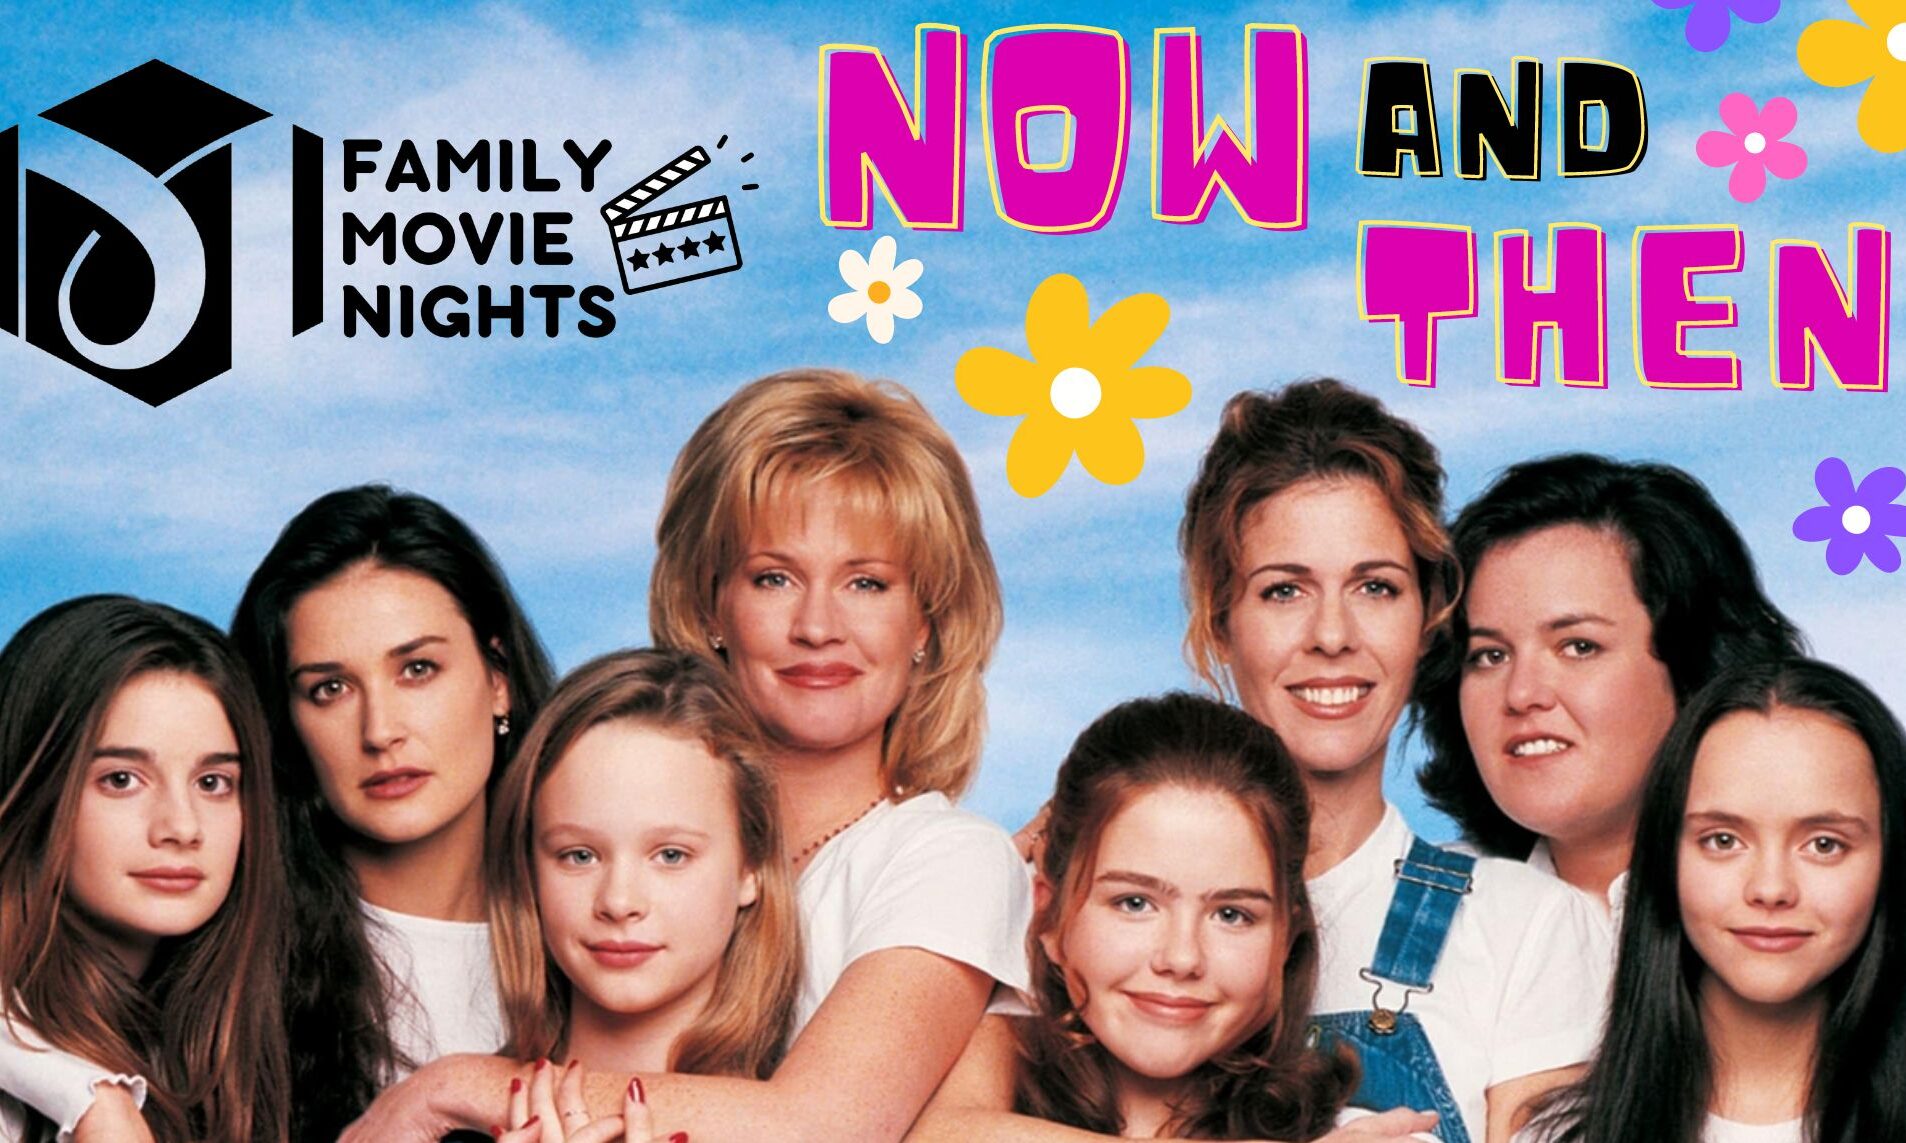 Family Movie Night: Now and Then (1995)